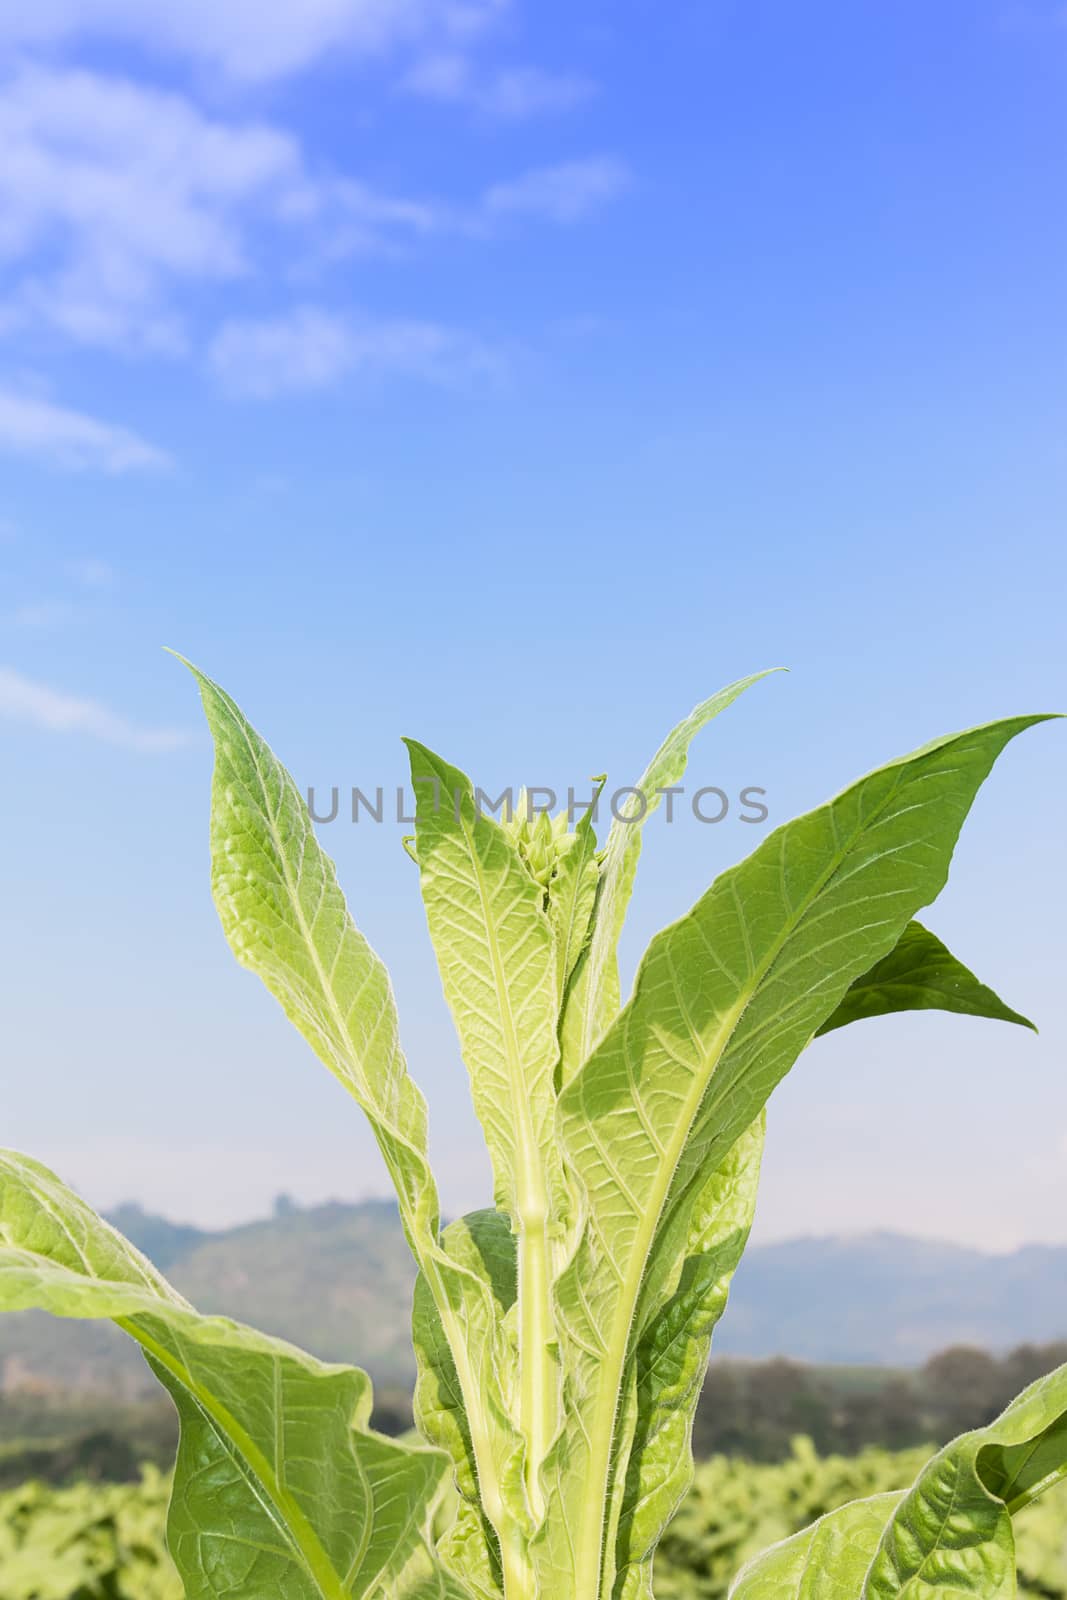 Close up Nicotiana tabacum, the Common tobacco is an annually-growing herbaceous plant